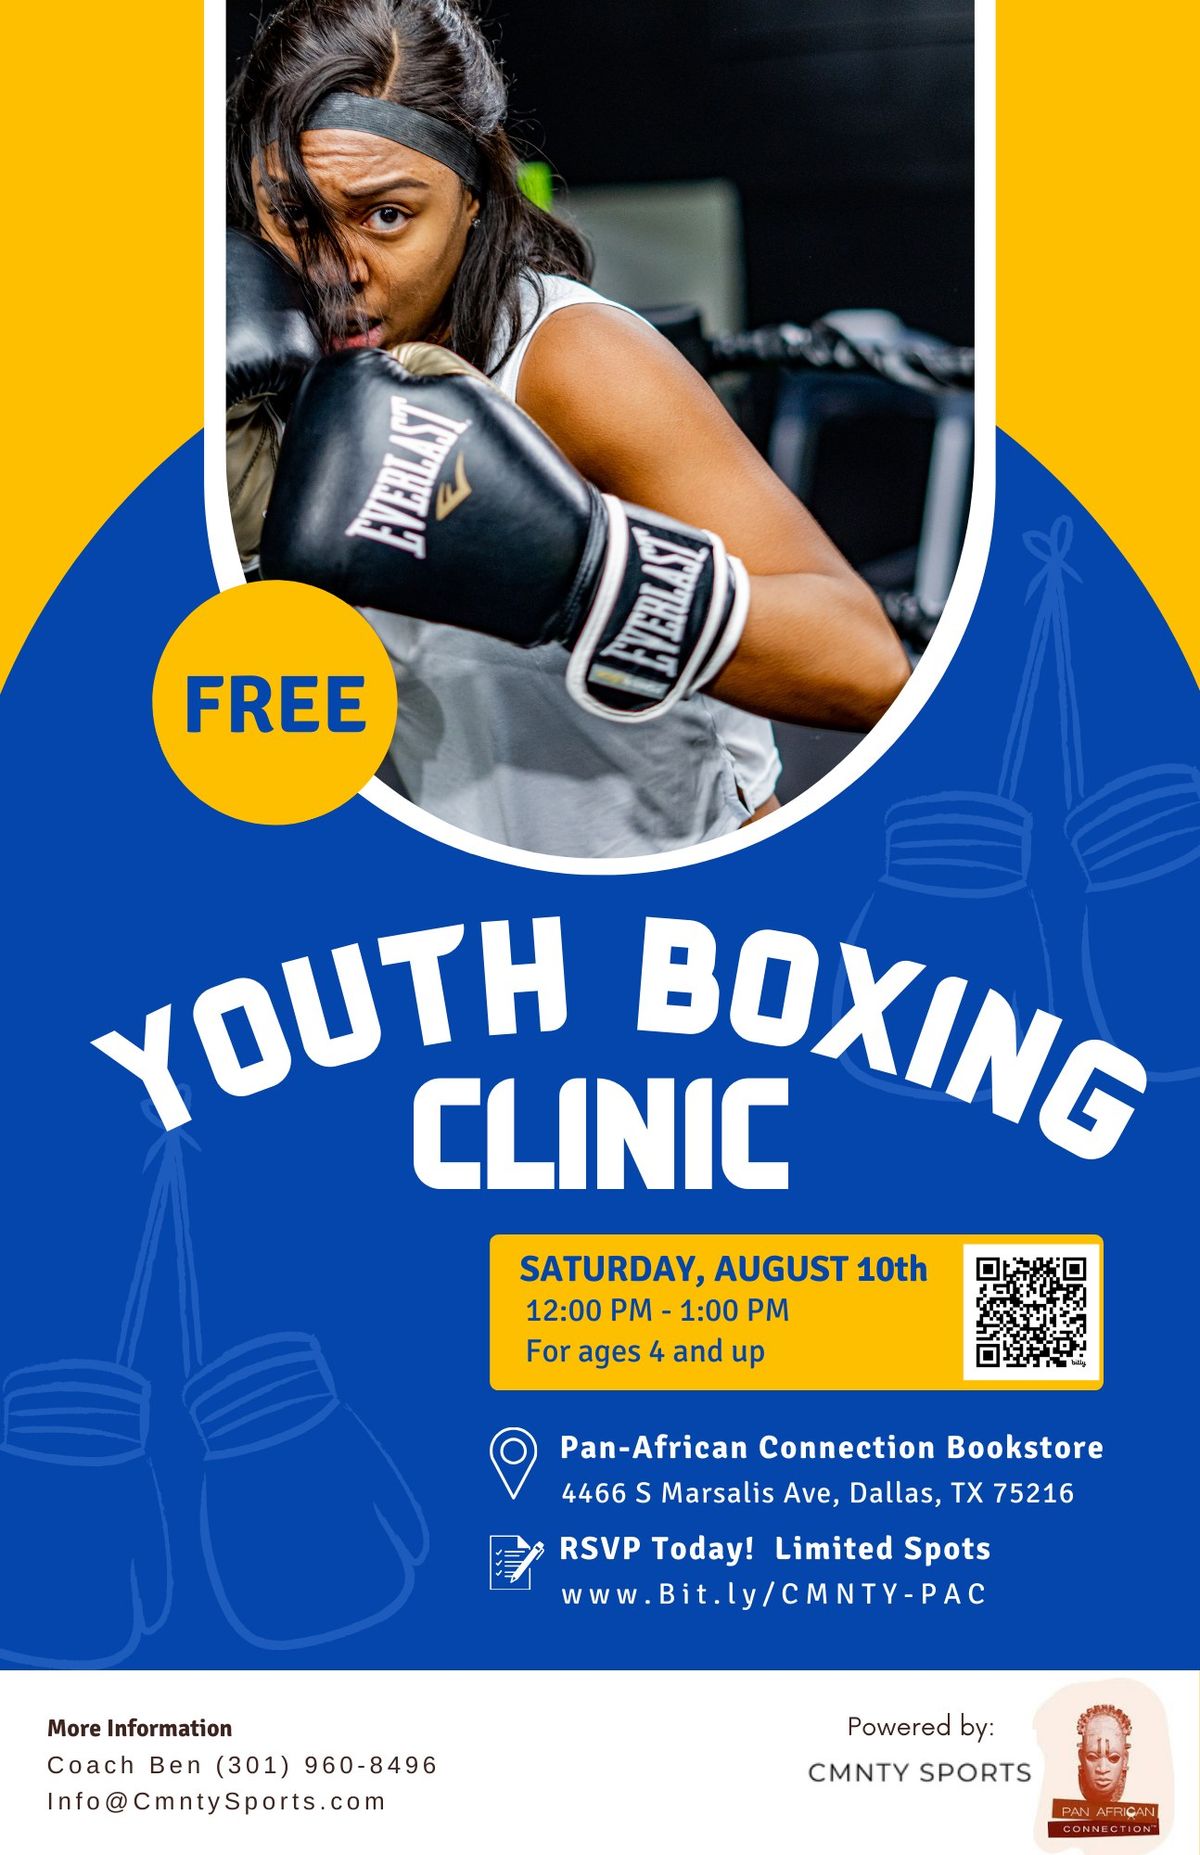 FREE Youth Boxing Clinic sponsored by PAC Dallas